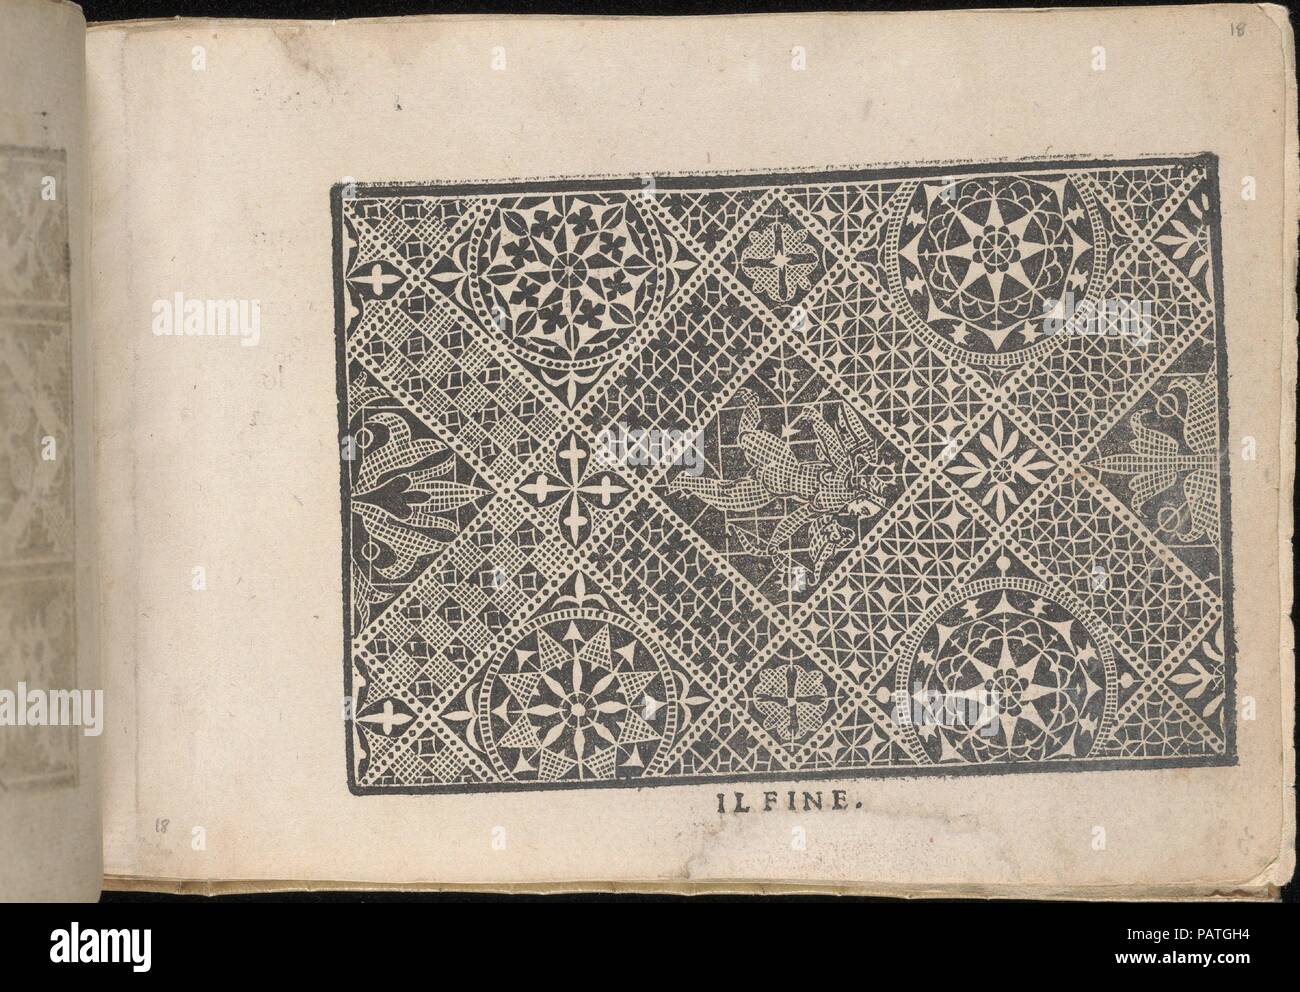 Fiori di Ricami Nuovamente Posti in Luce, page 18 (recto). Designer: Matteo Florimi (Italian, active Siena, ca. 1581-died 1613). Dimensions: Overall: 5 1/2 x 7 7/8 in. (14 x 20 cm). Published in: Venice. Publisher: Francesco de' Franceschi (Italian, active 16th century) , Venice. Date: 1591.  Designed by Matteo Florimi, Italian, active Siena, ca. 1581-died 1613, published by Francesco de' Franceschi, Italian, active 16th century, Venice.  From top to bottom, and left to right:  Design decorated with a pattern of ornamented diamonds. The central diamond contains an illustration of a spotted fem Stock Photo